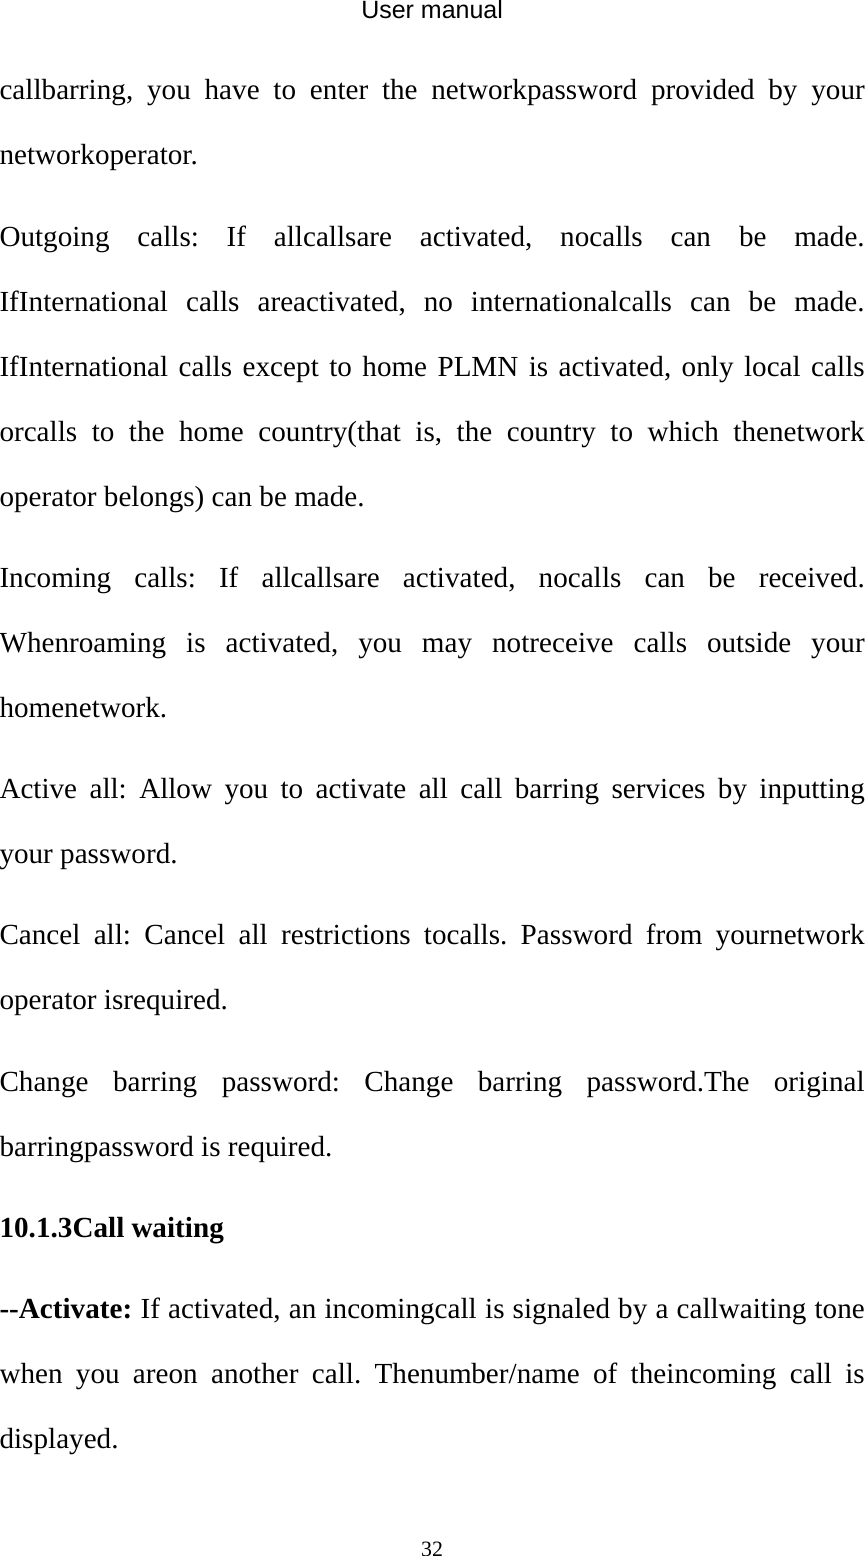 User manual  32callbarring, you have to enter the networkpassword provided by your networkoperator. Outgoing calls: If allcallsare activated, nocalls can be made. IfInternational calls areactivated, no internationalcalls can be made. IfInternational calls except to home PLMN is activated, only local calls orcalls to the home country(that is, the country to which thenetwork operator belongs) can be made. Incoming calls: If allcallsare activated, nocalls can be received. Whenroaming is activated, you may notreceive calls outside your homenetwork. Active all: Allow you to activate all call barring services by inputting your password. Cancel all: Cancel all restrictions tocalls. Password from yournetwork operator isrequired. Change barring password: Change barring password.The original barringpassword is required. 10.1.3Call waiting --Activate: If activated, an incomingcall is signaled by a callwaiting tone when you areon another call. Thenumber/name of theincoming call is displayed. 